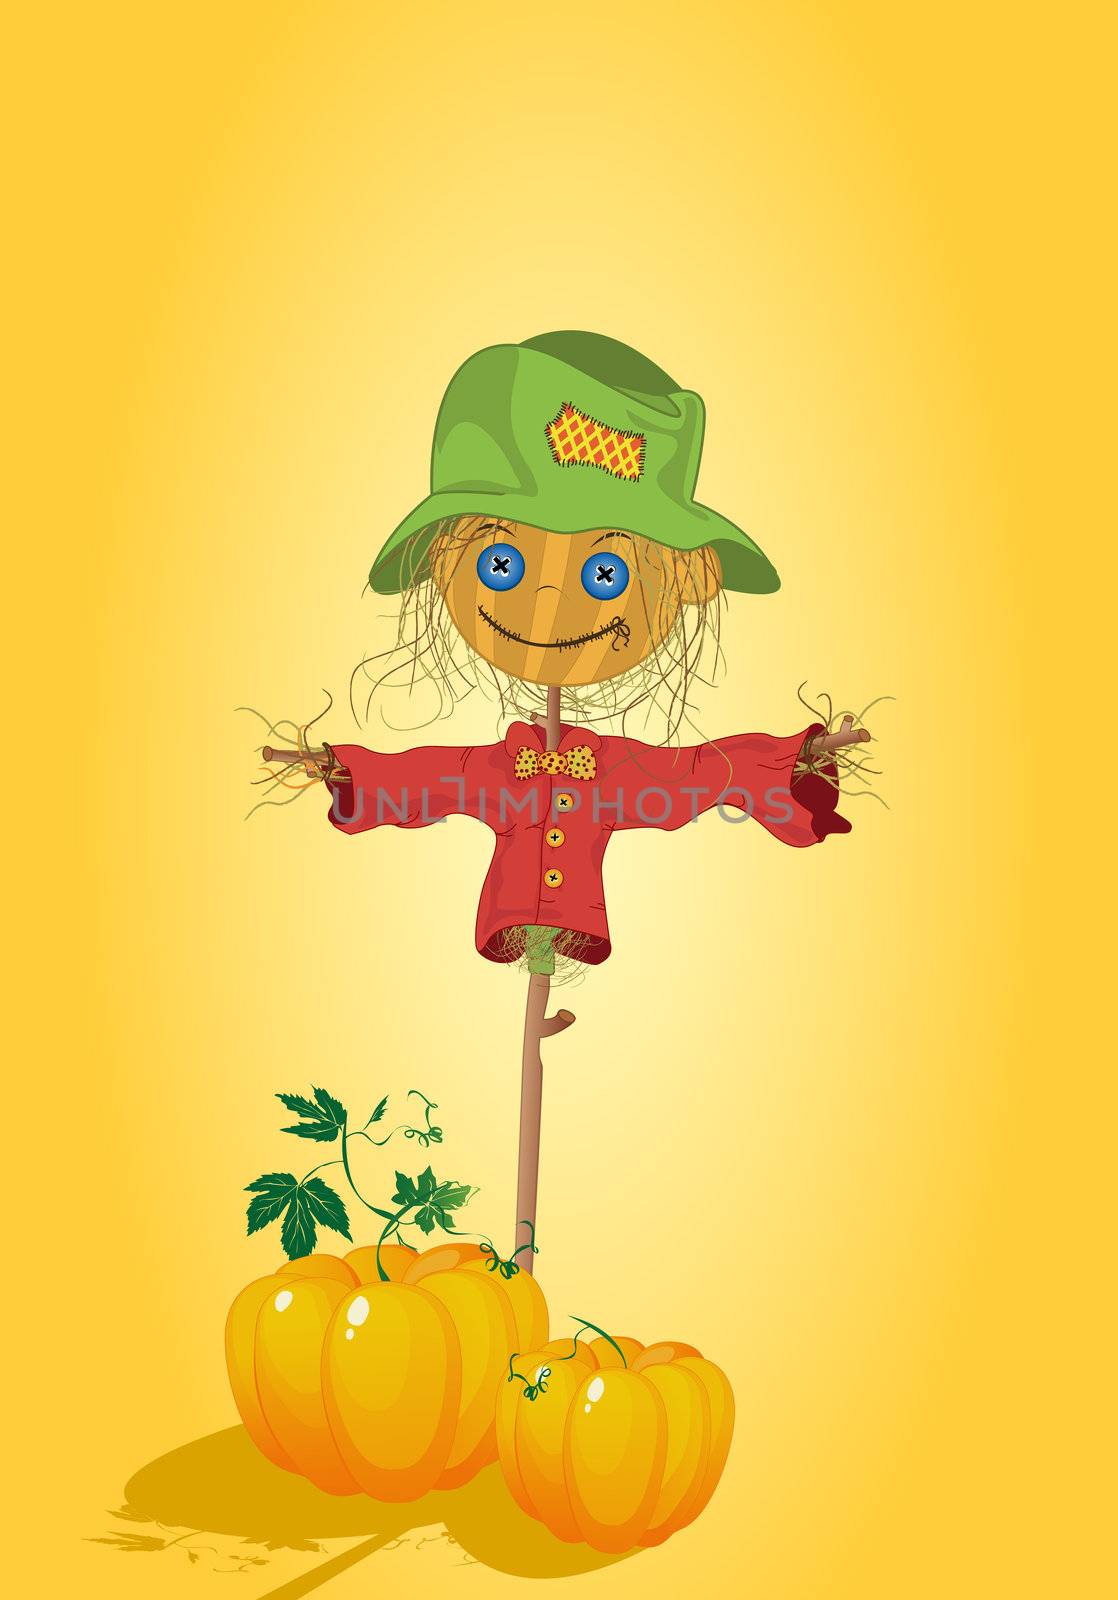 Scarecrow with pumpkins by Lirch